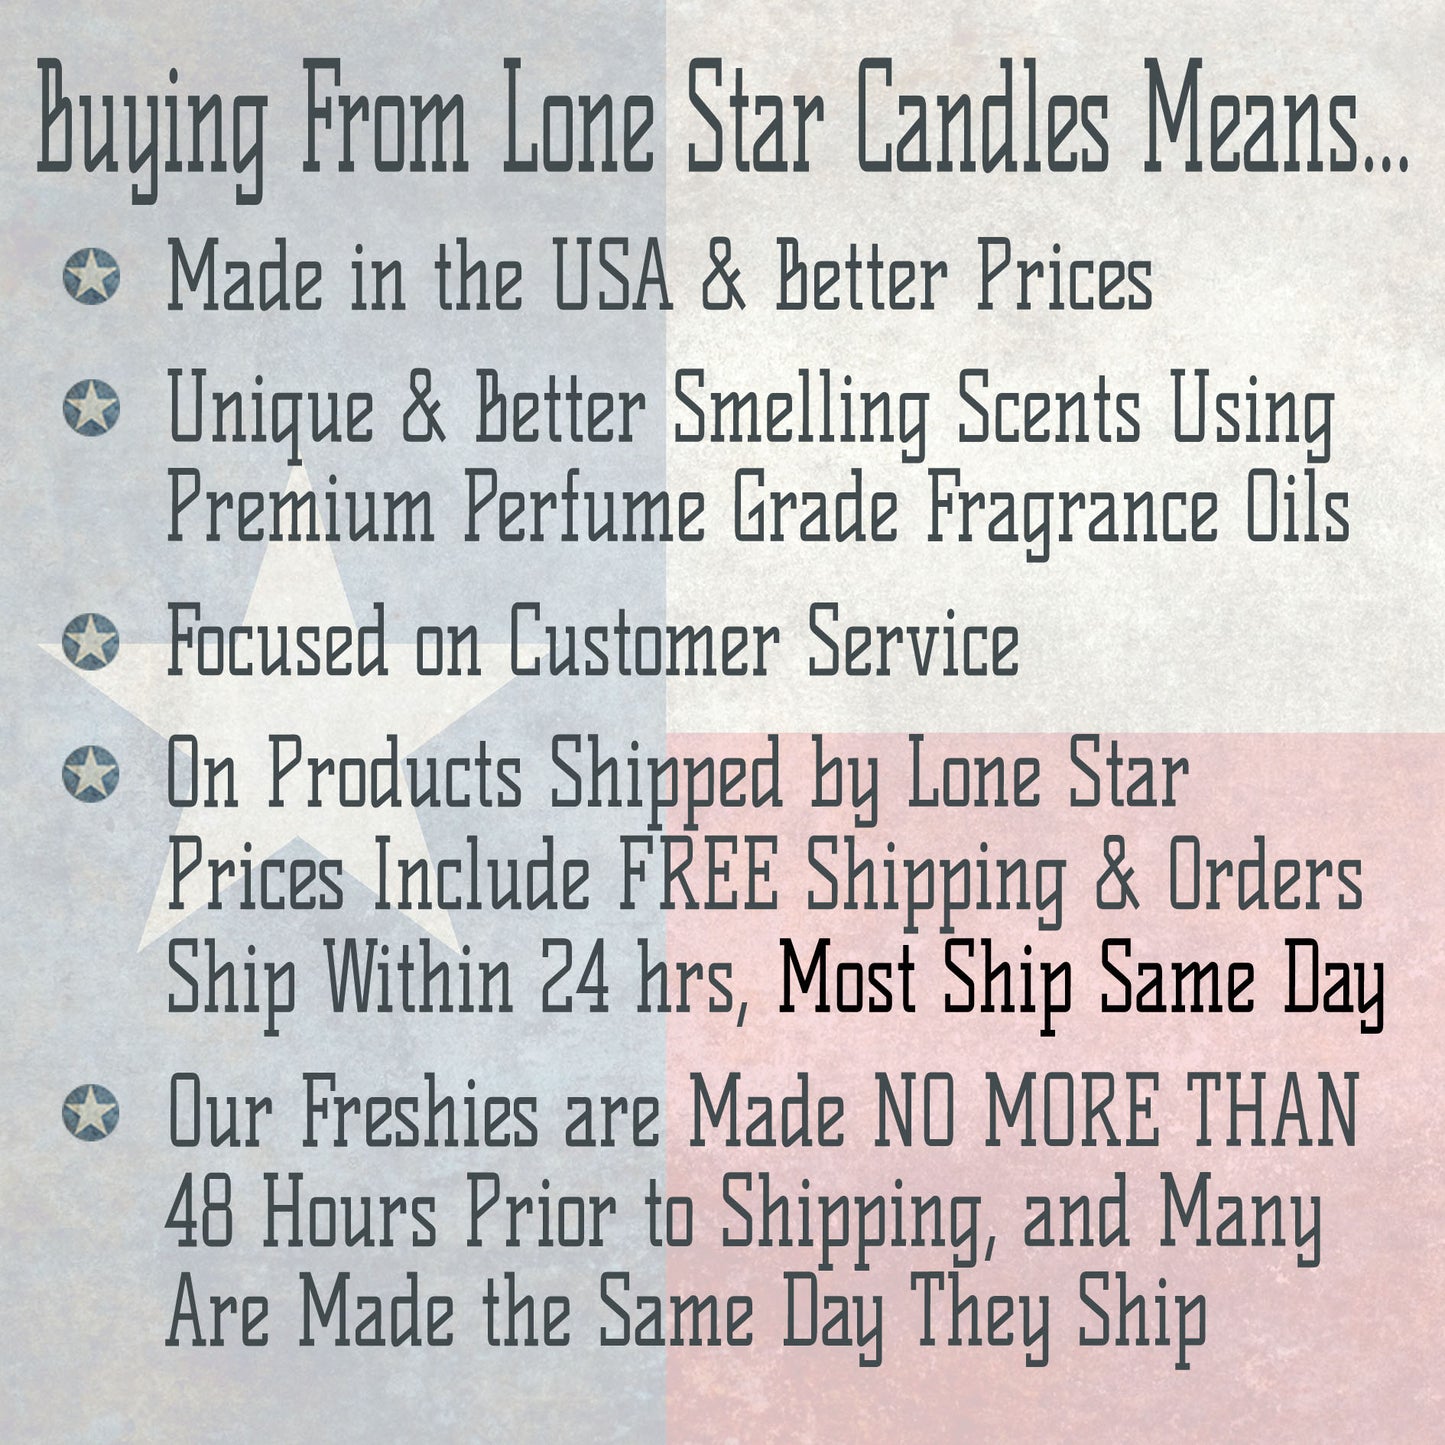 Cranberries & Sandalwood, Lone Star Candles & More's Premium Strongly Scented Freshies, A Delightful Mix of Spiced Cranberry, & Sandalwood, Car & Air Freshener, USA Made in Texas, Music Note 1-Pack